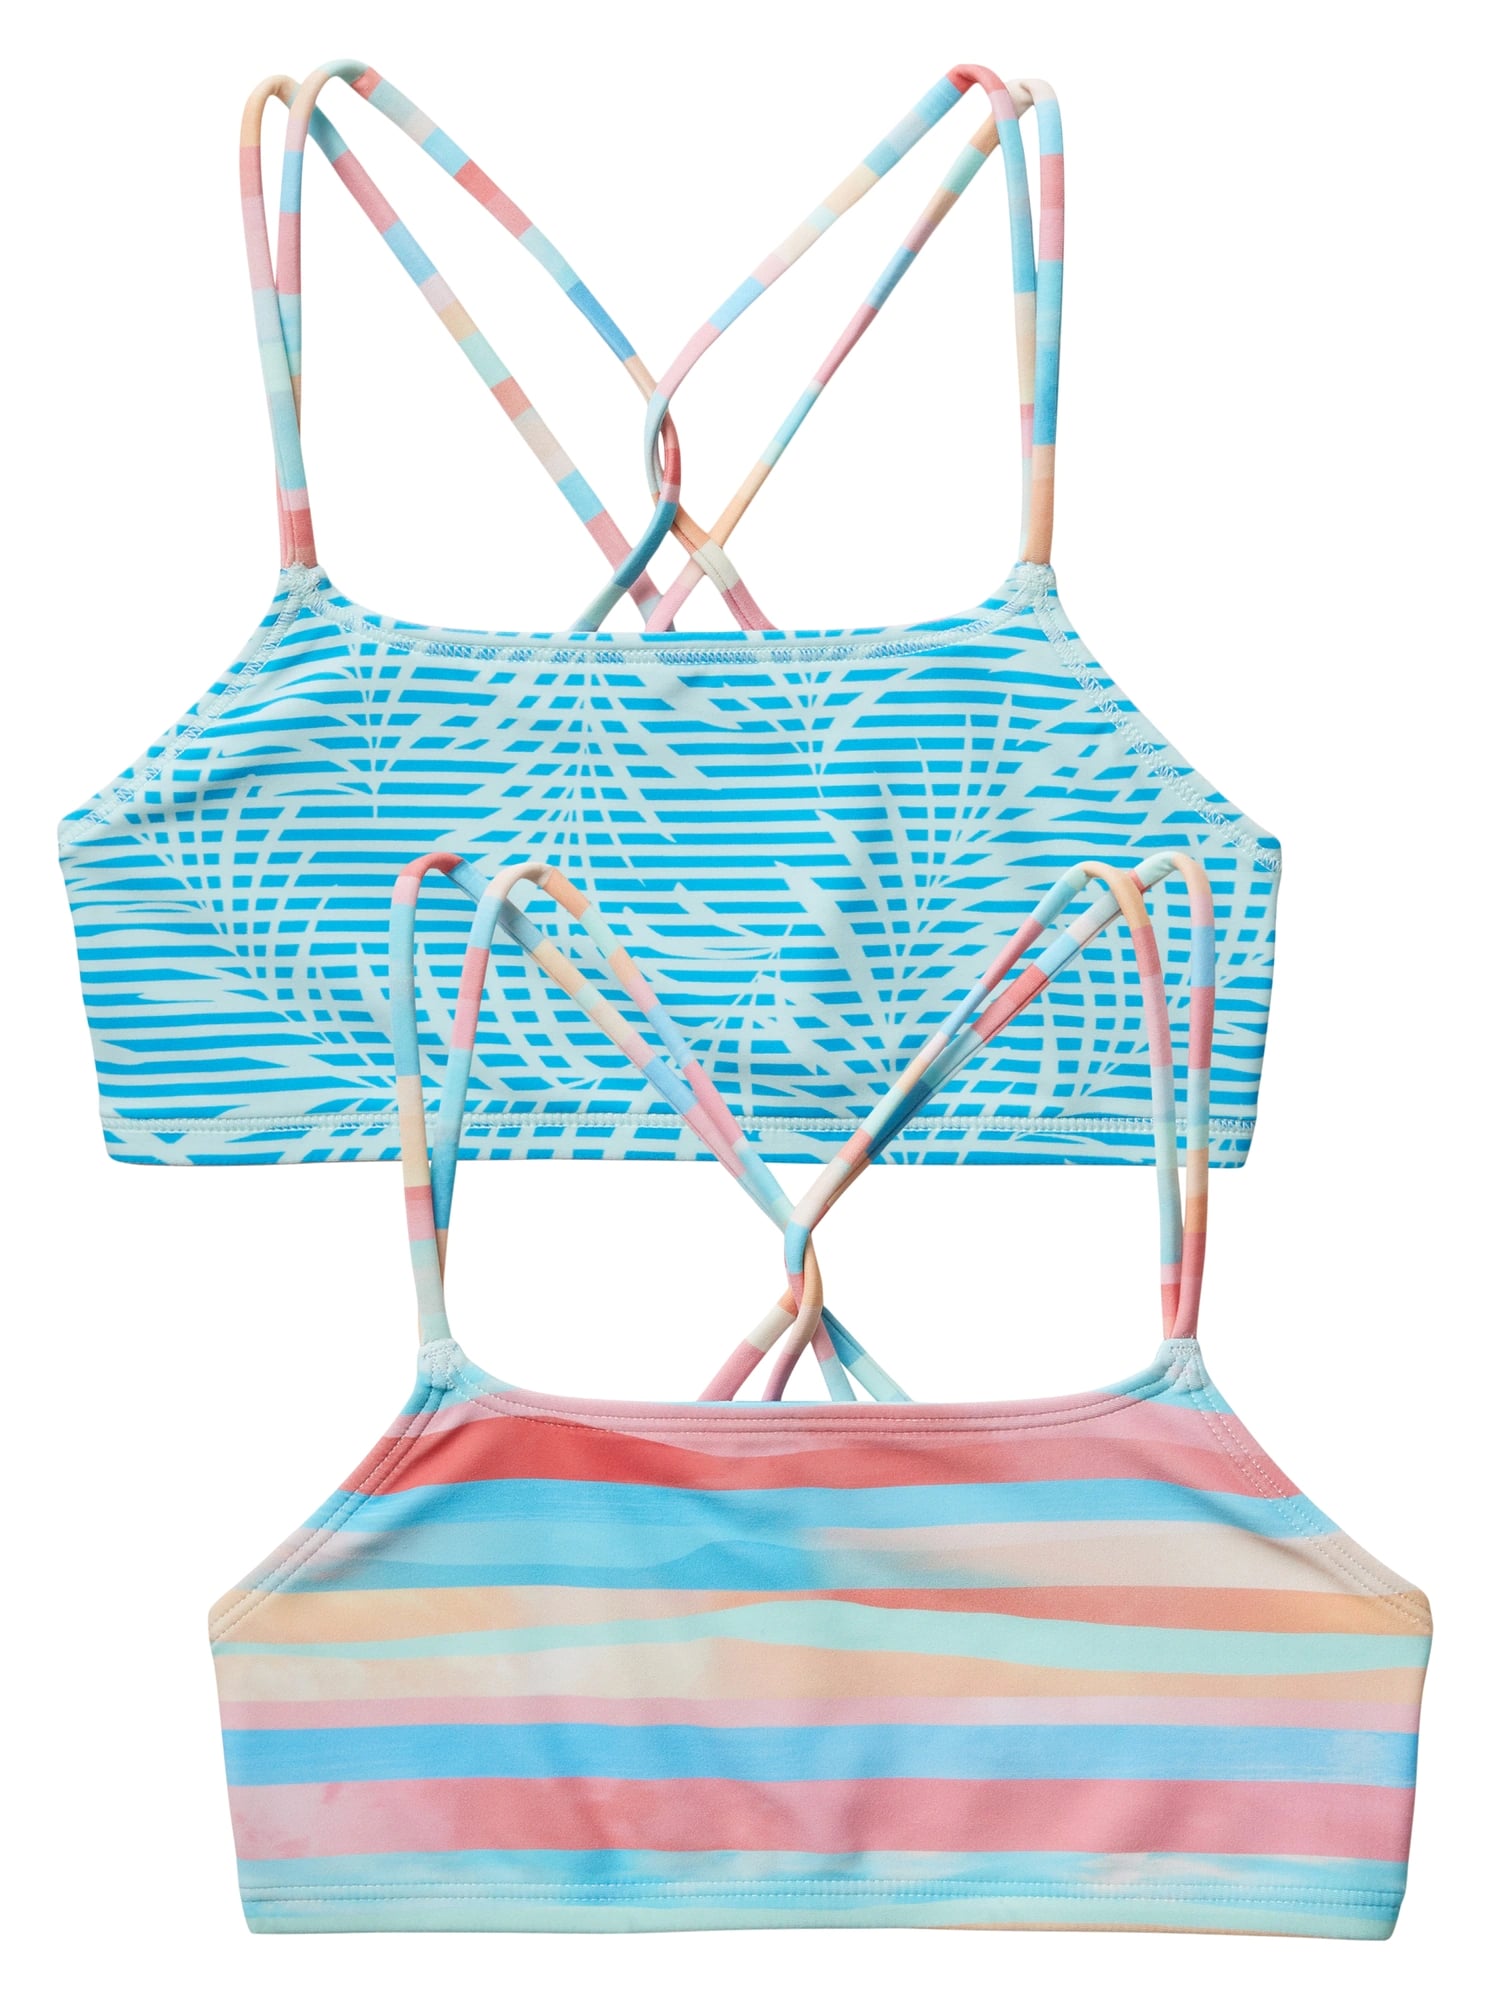 Shop Printed Swimsuits From Athleta Girl